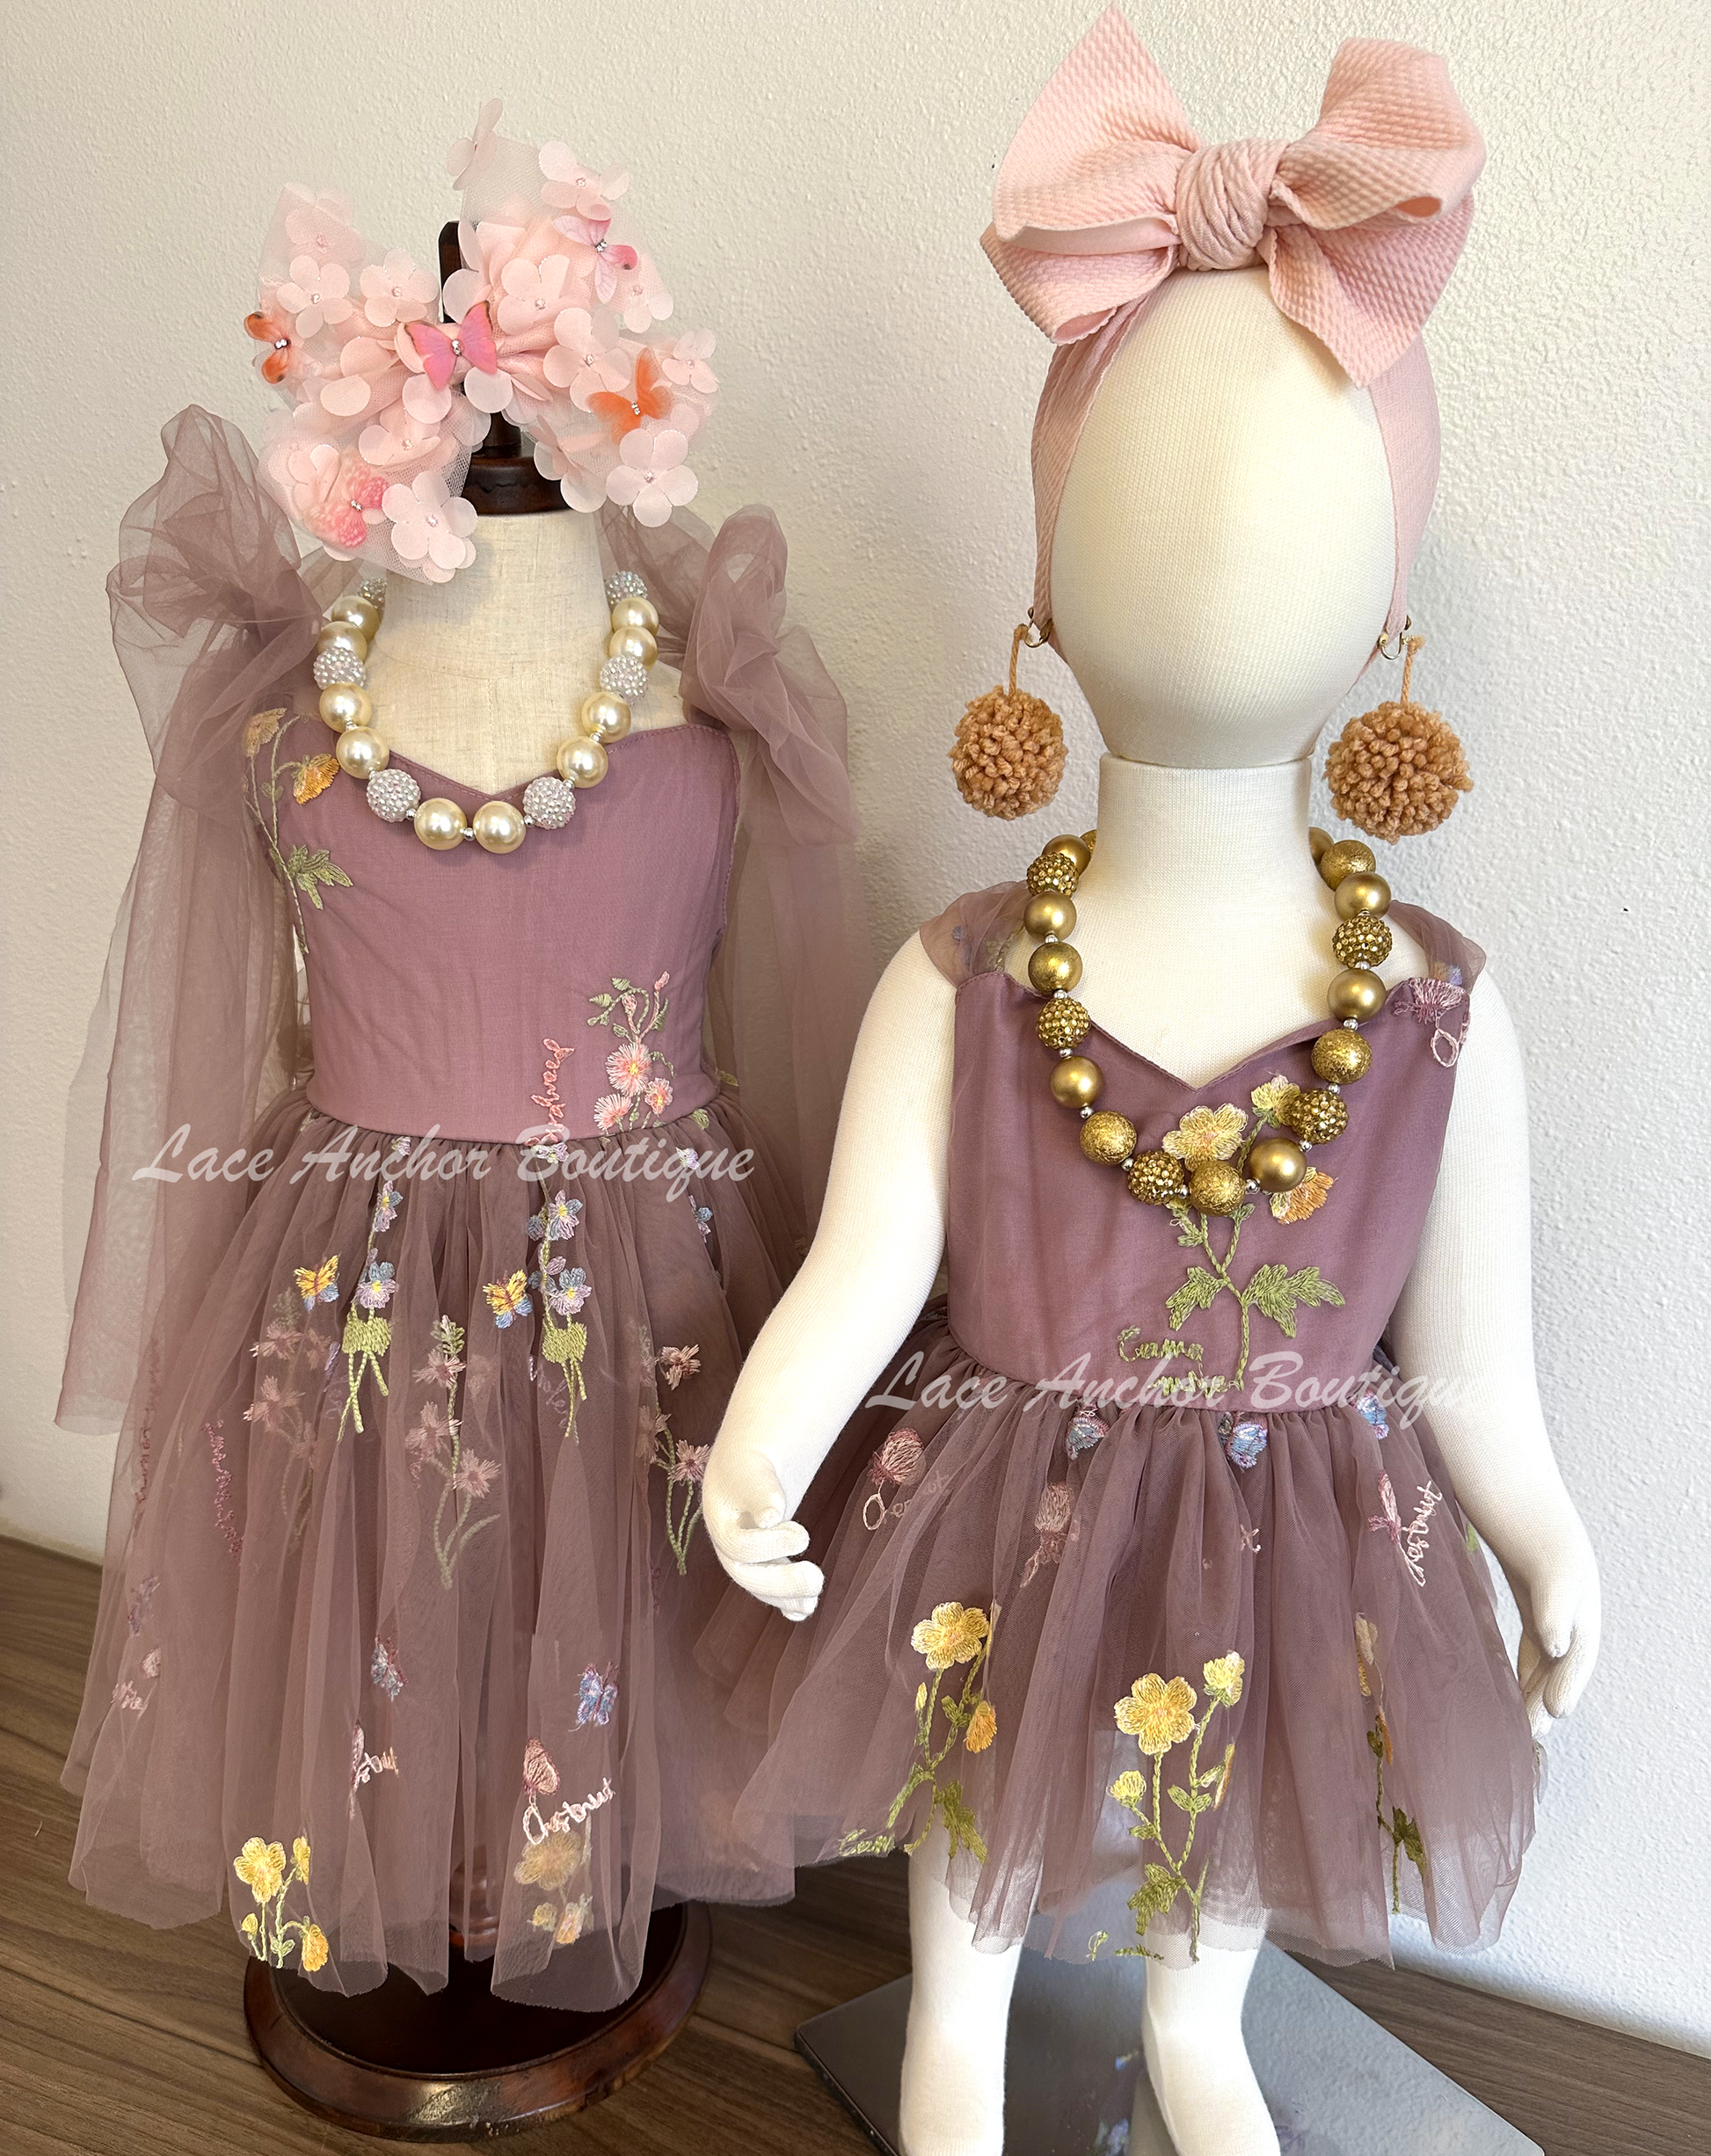 Baby girls romper with tied back fluffy bow. Outfits in deep plum purple with embroidered floral print.